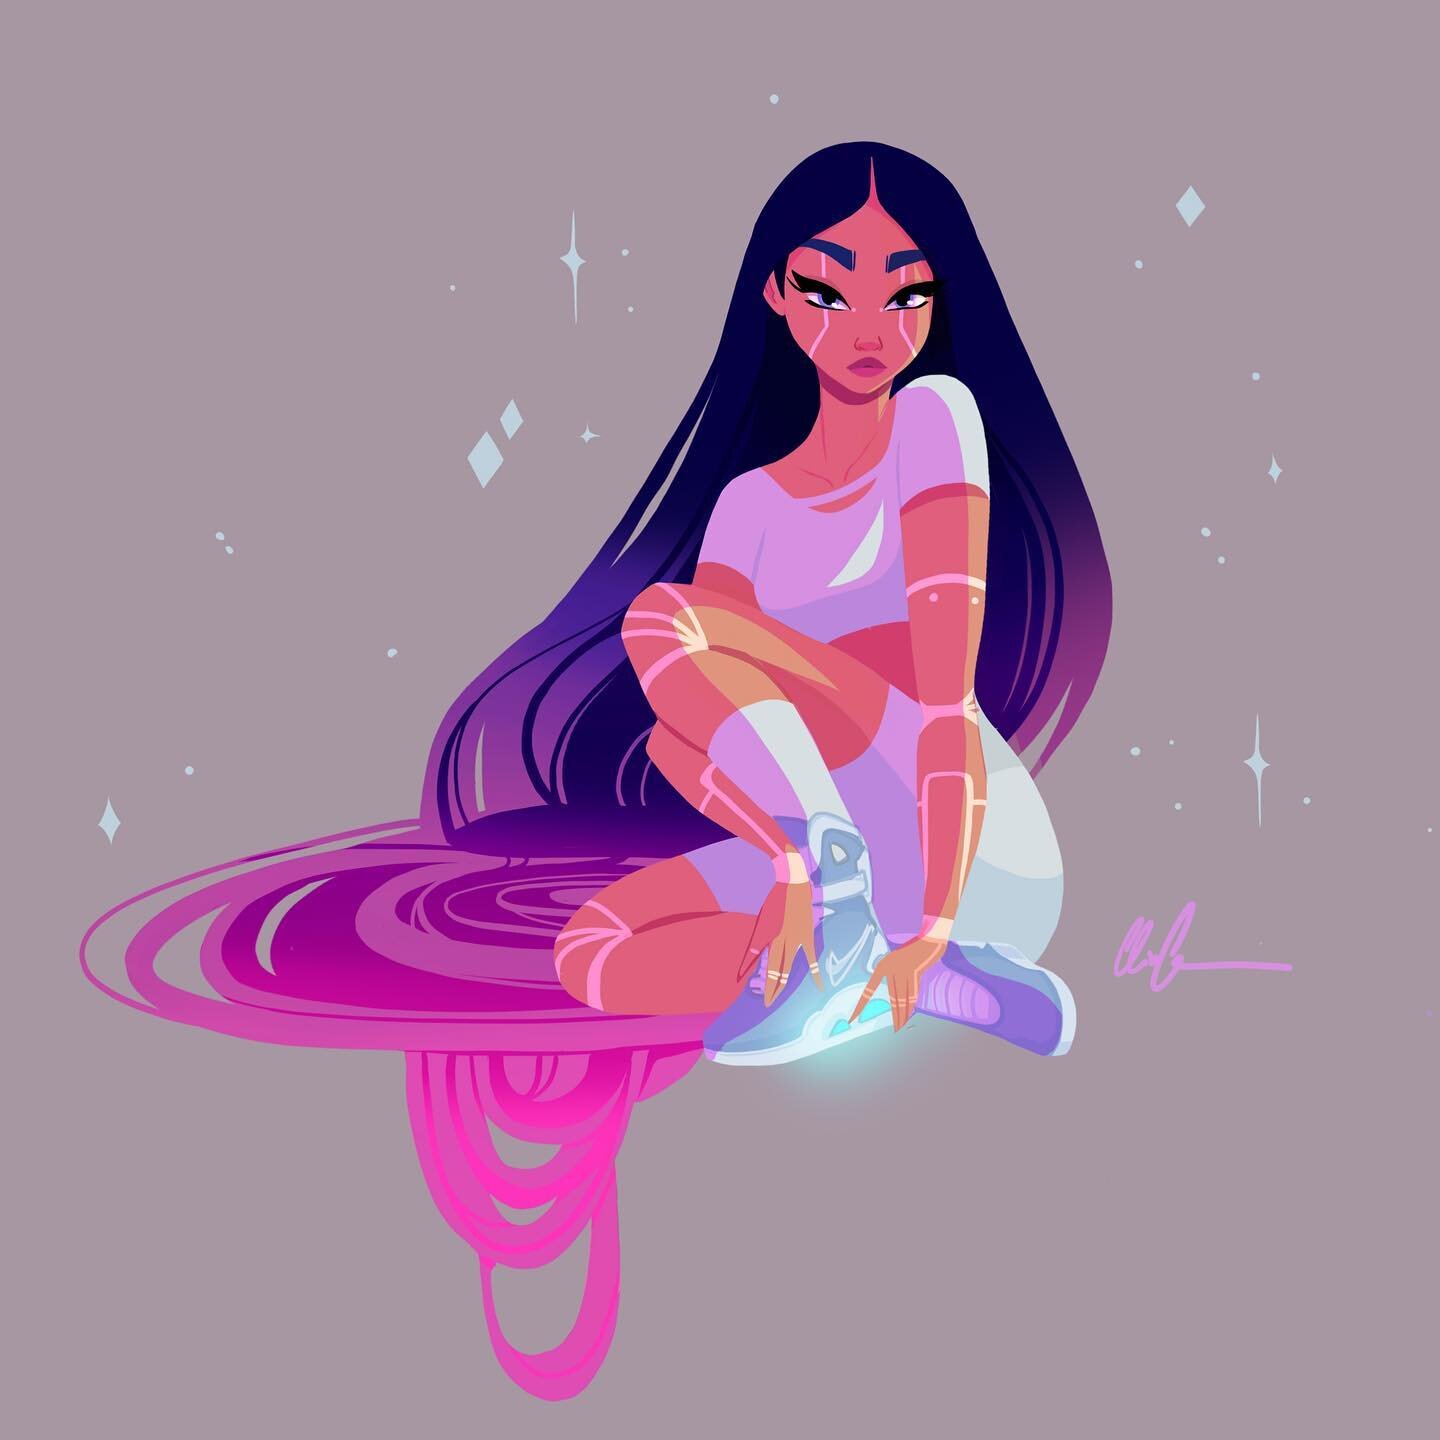 Sporty in Space
&bull;
Sticker available on etsy✨
&bull;
Do you recognize from which movie the shoes are from? 😘✨
&bull;
Let me know in the comments if you prefer this Cyborg-Lady with the lighting or without! 
&bull;
There&lsquo;s some new items in